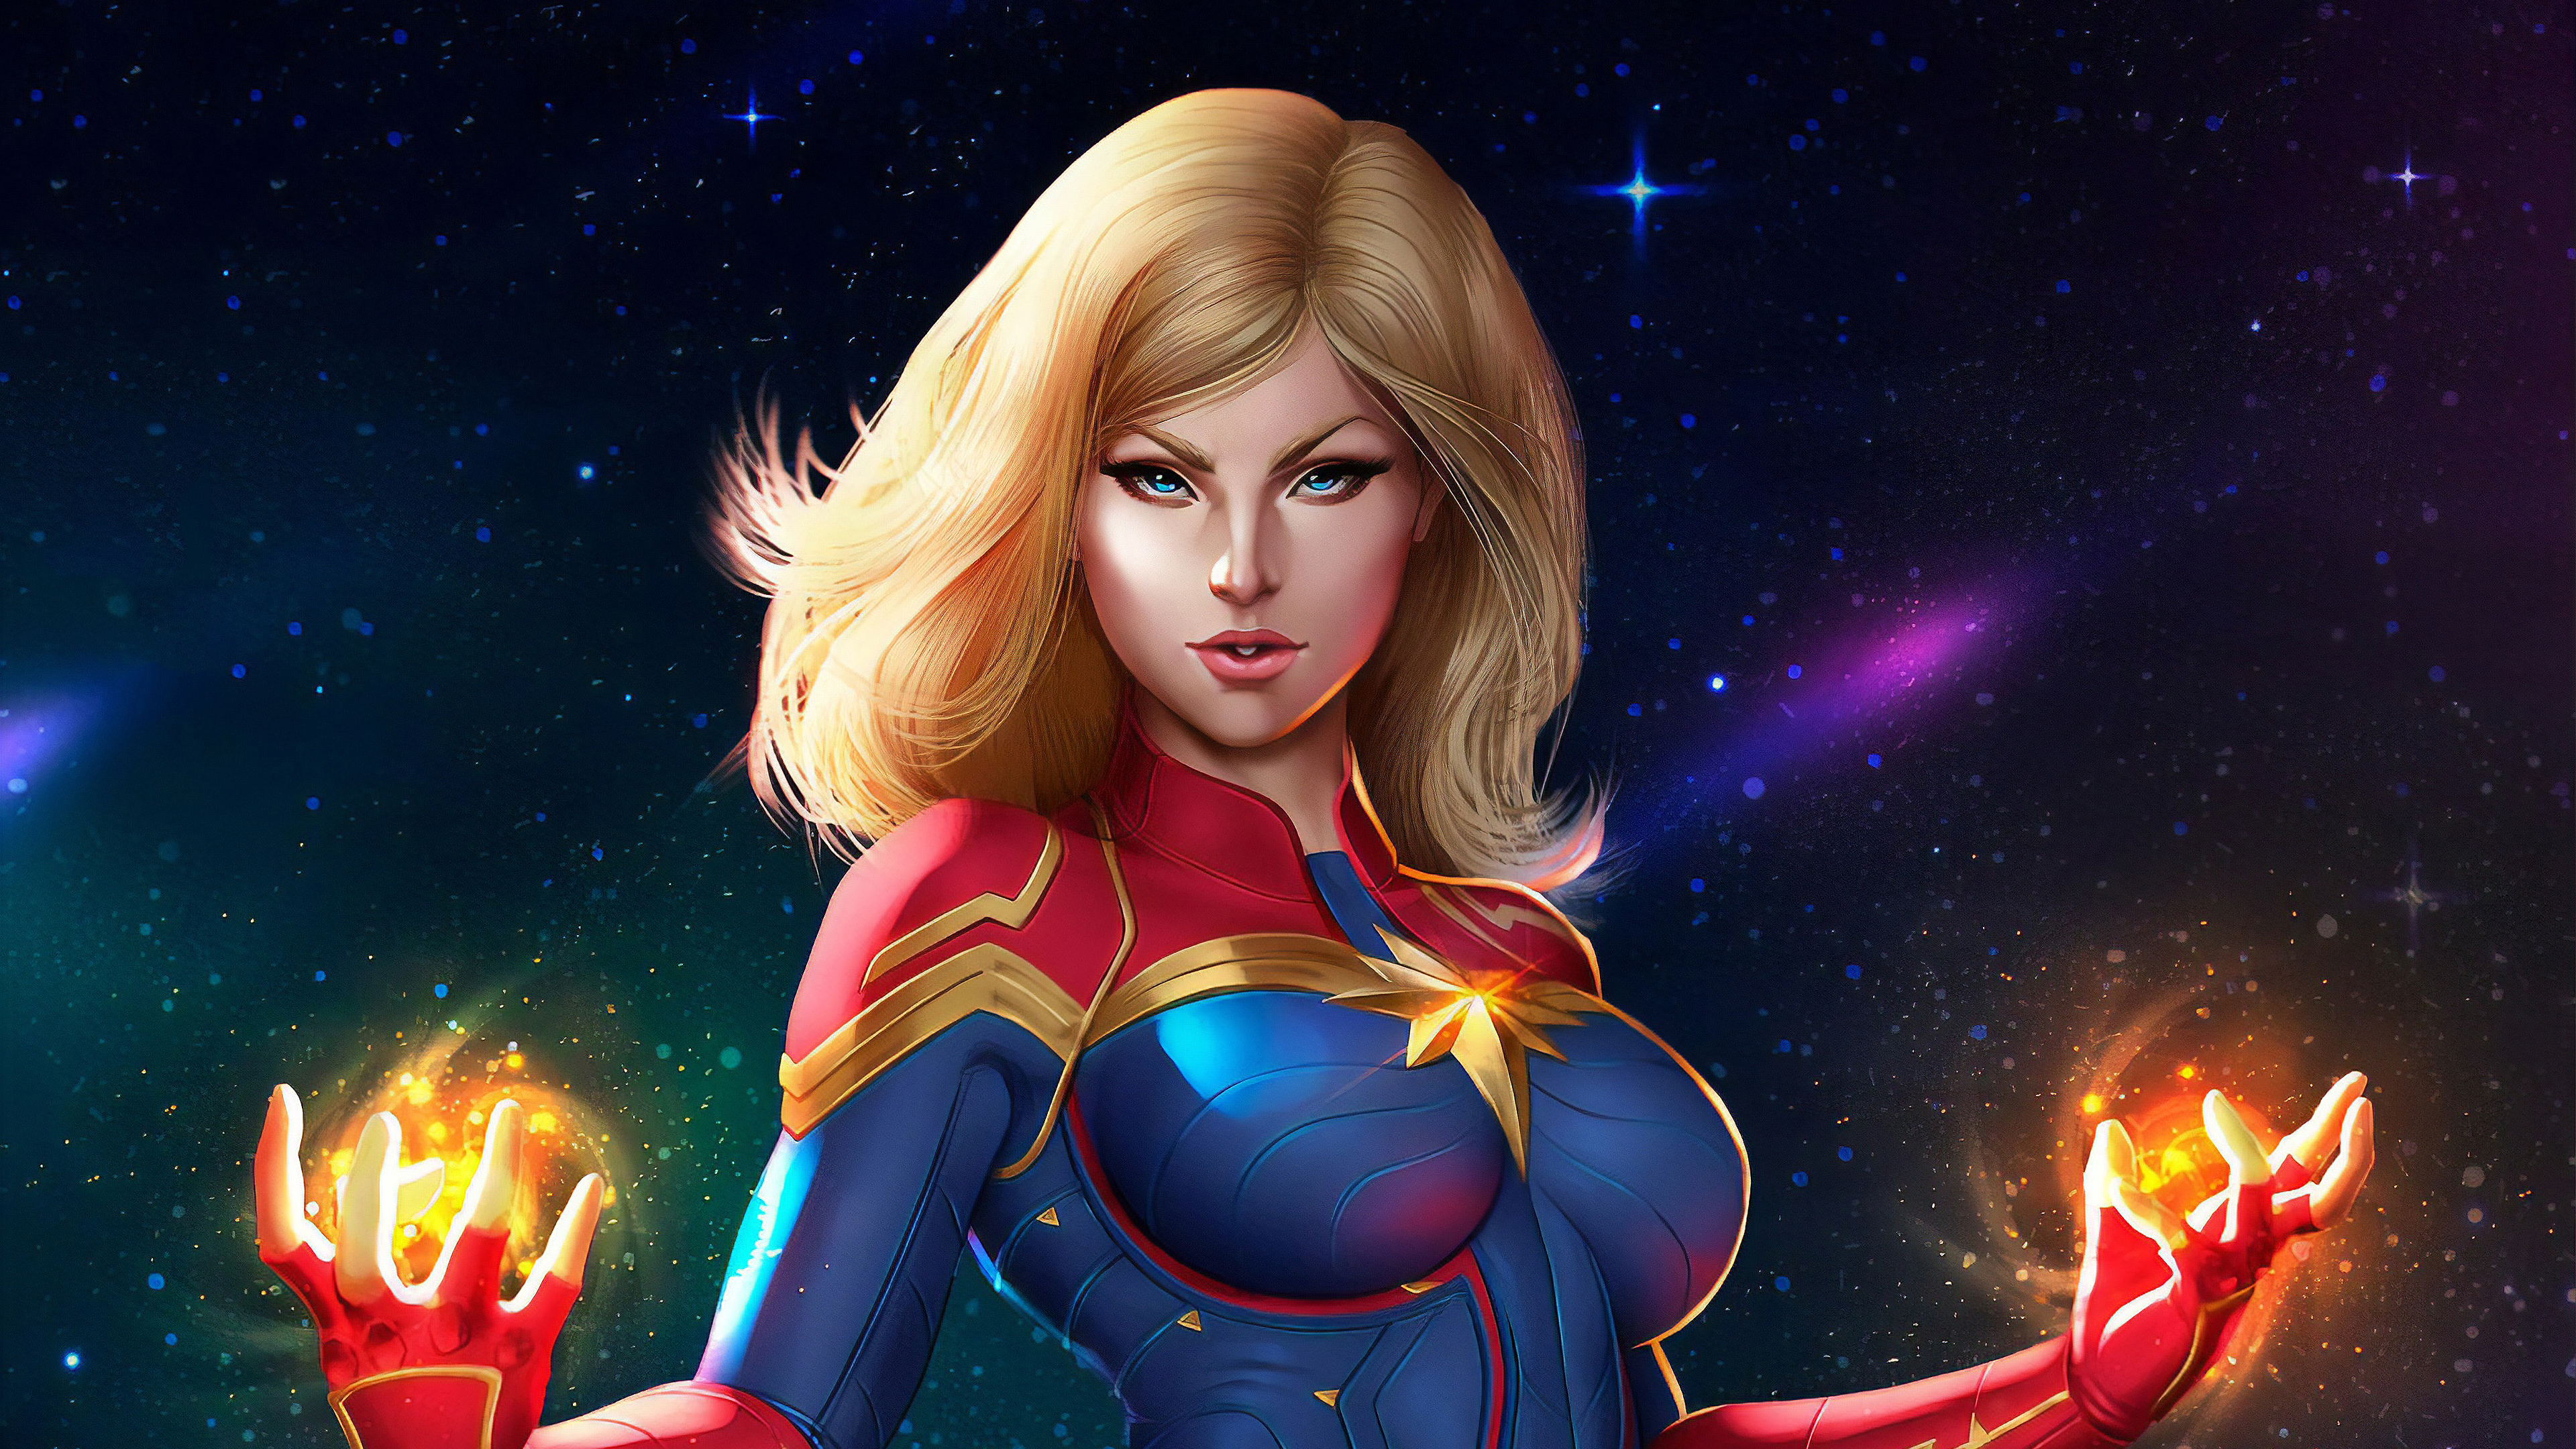 Captain Marvel Wallpaper 4k iPhone, Android and Desktop - Page 2 of 3 - The  RamenSwag